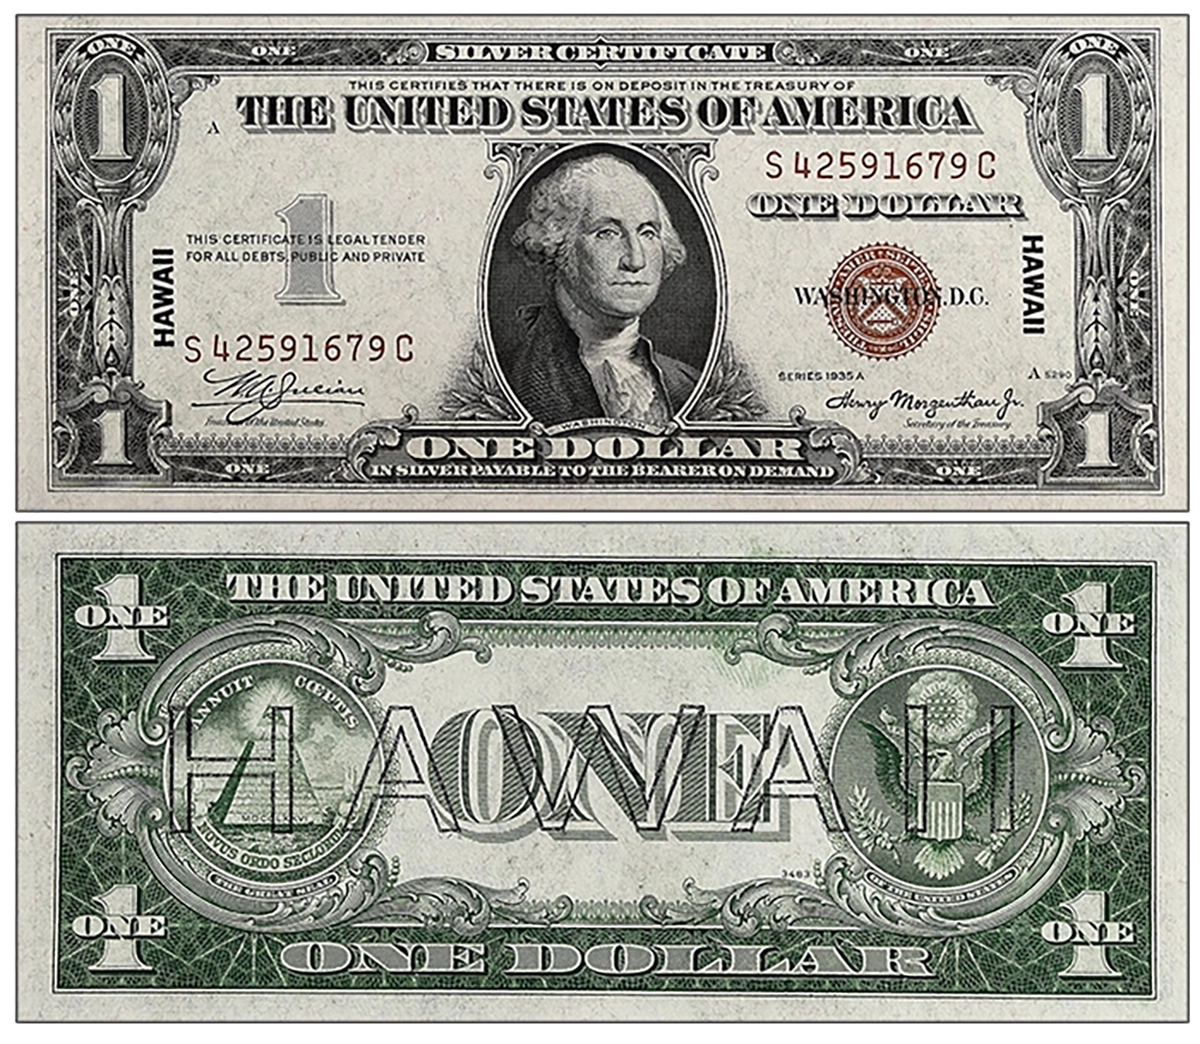 Series 1935A, Hawaii Issue, $1 Silver Certificate. Image: Stack's Bowers.